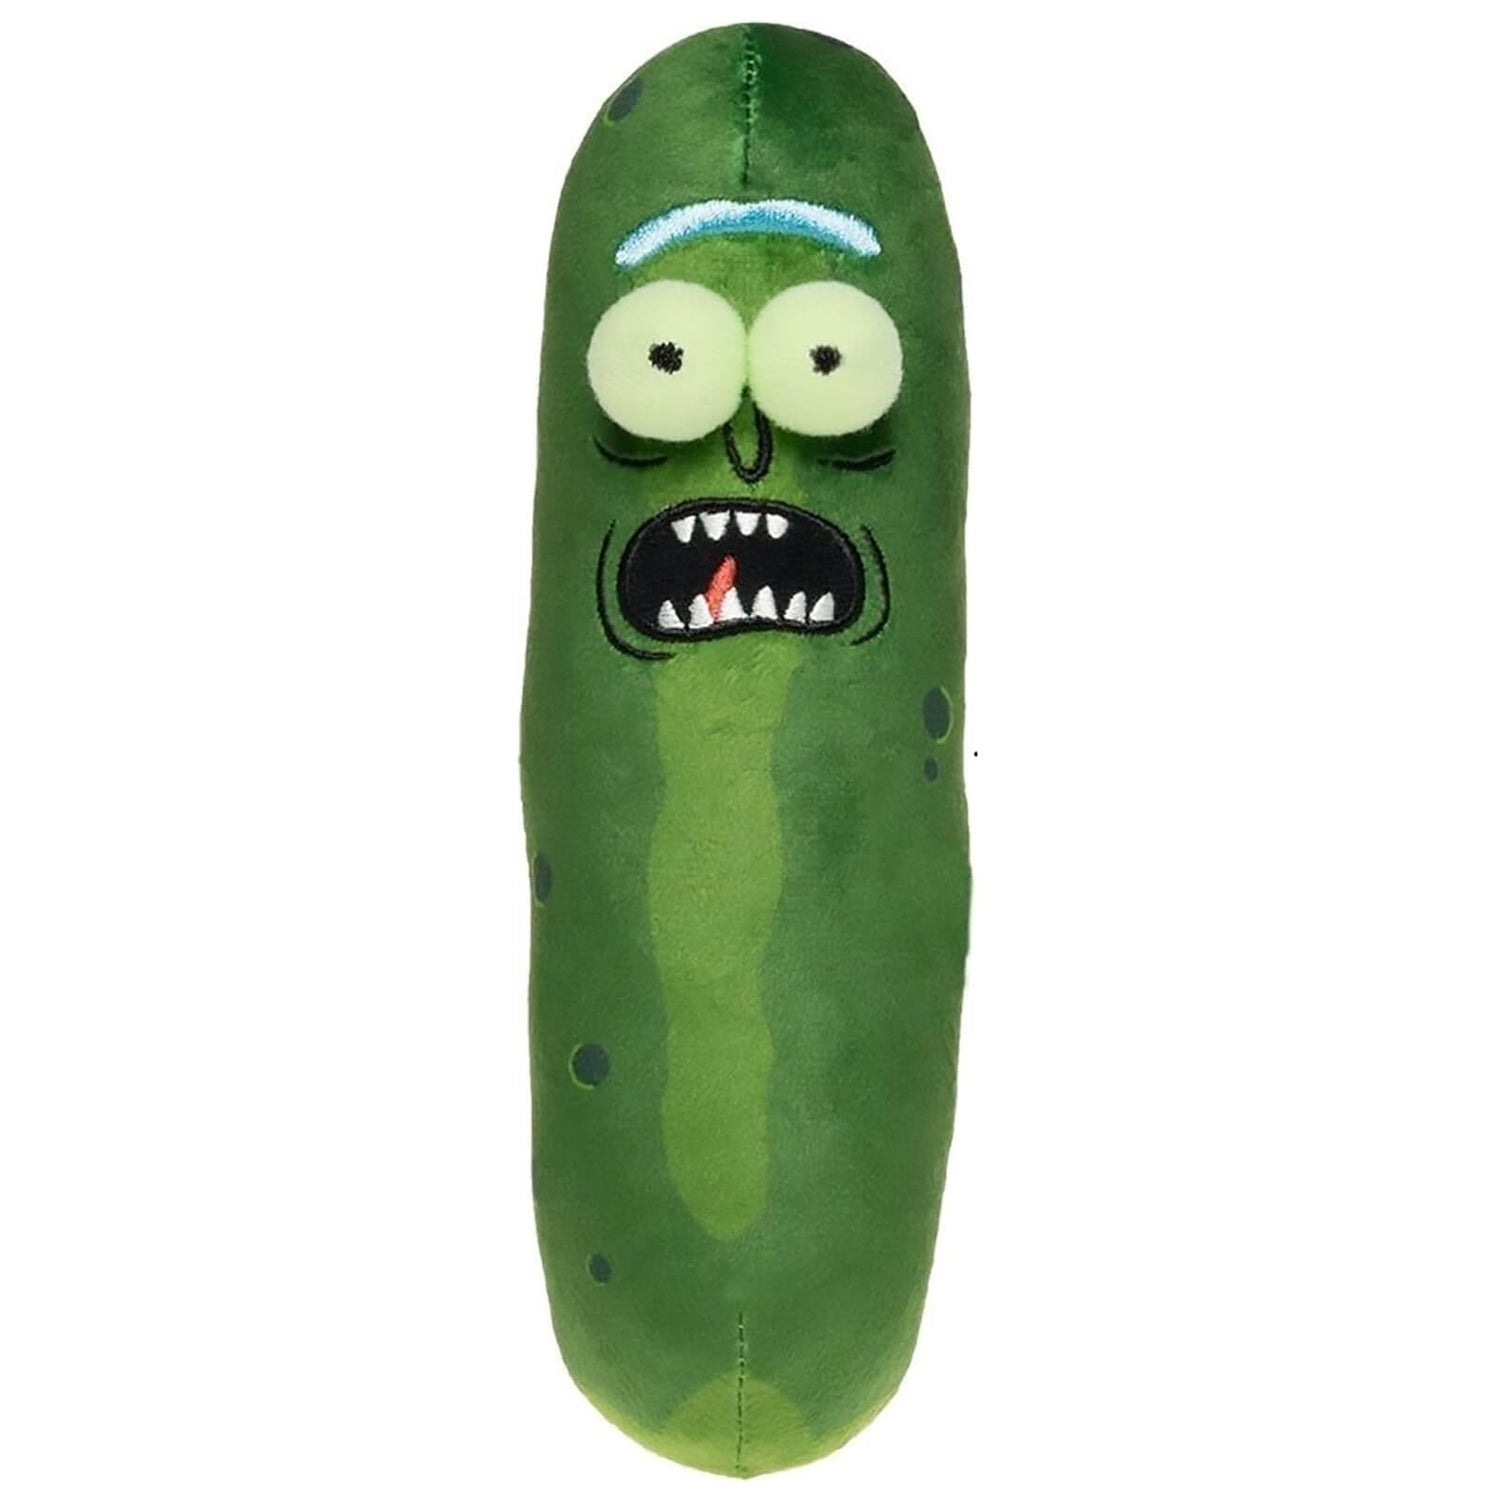 Rick and Morty Scared Pickle Rick 7"" Galactic Plushie